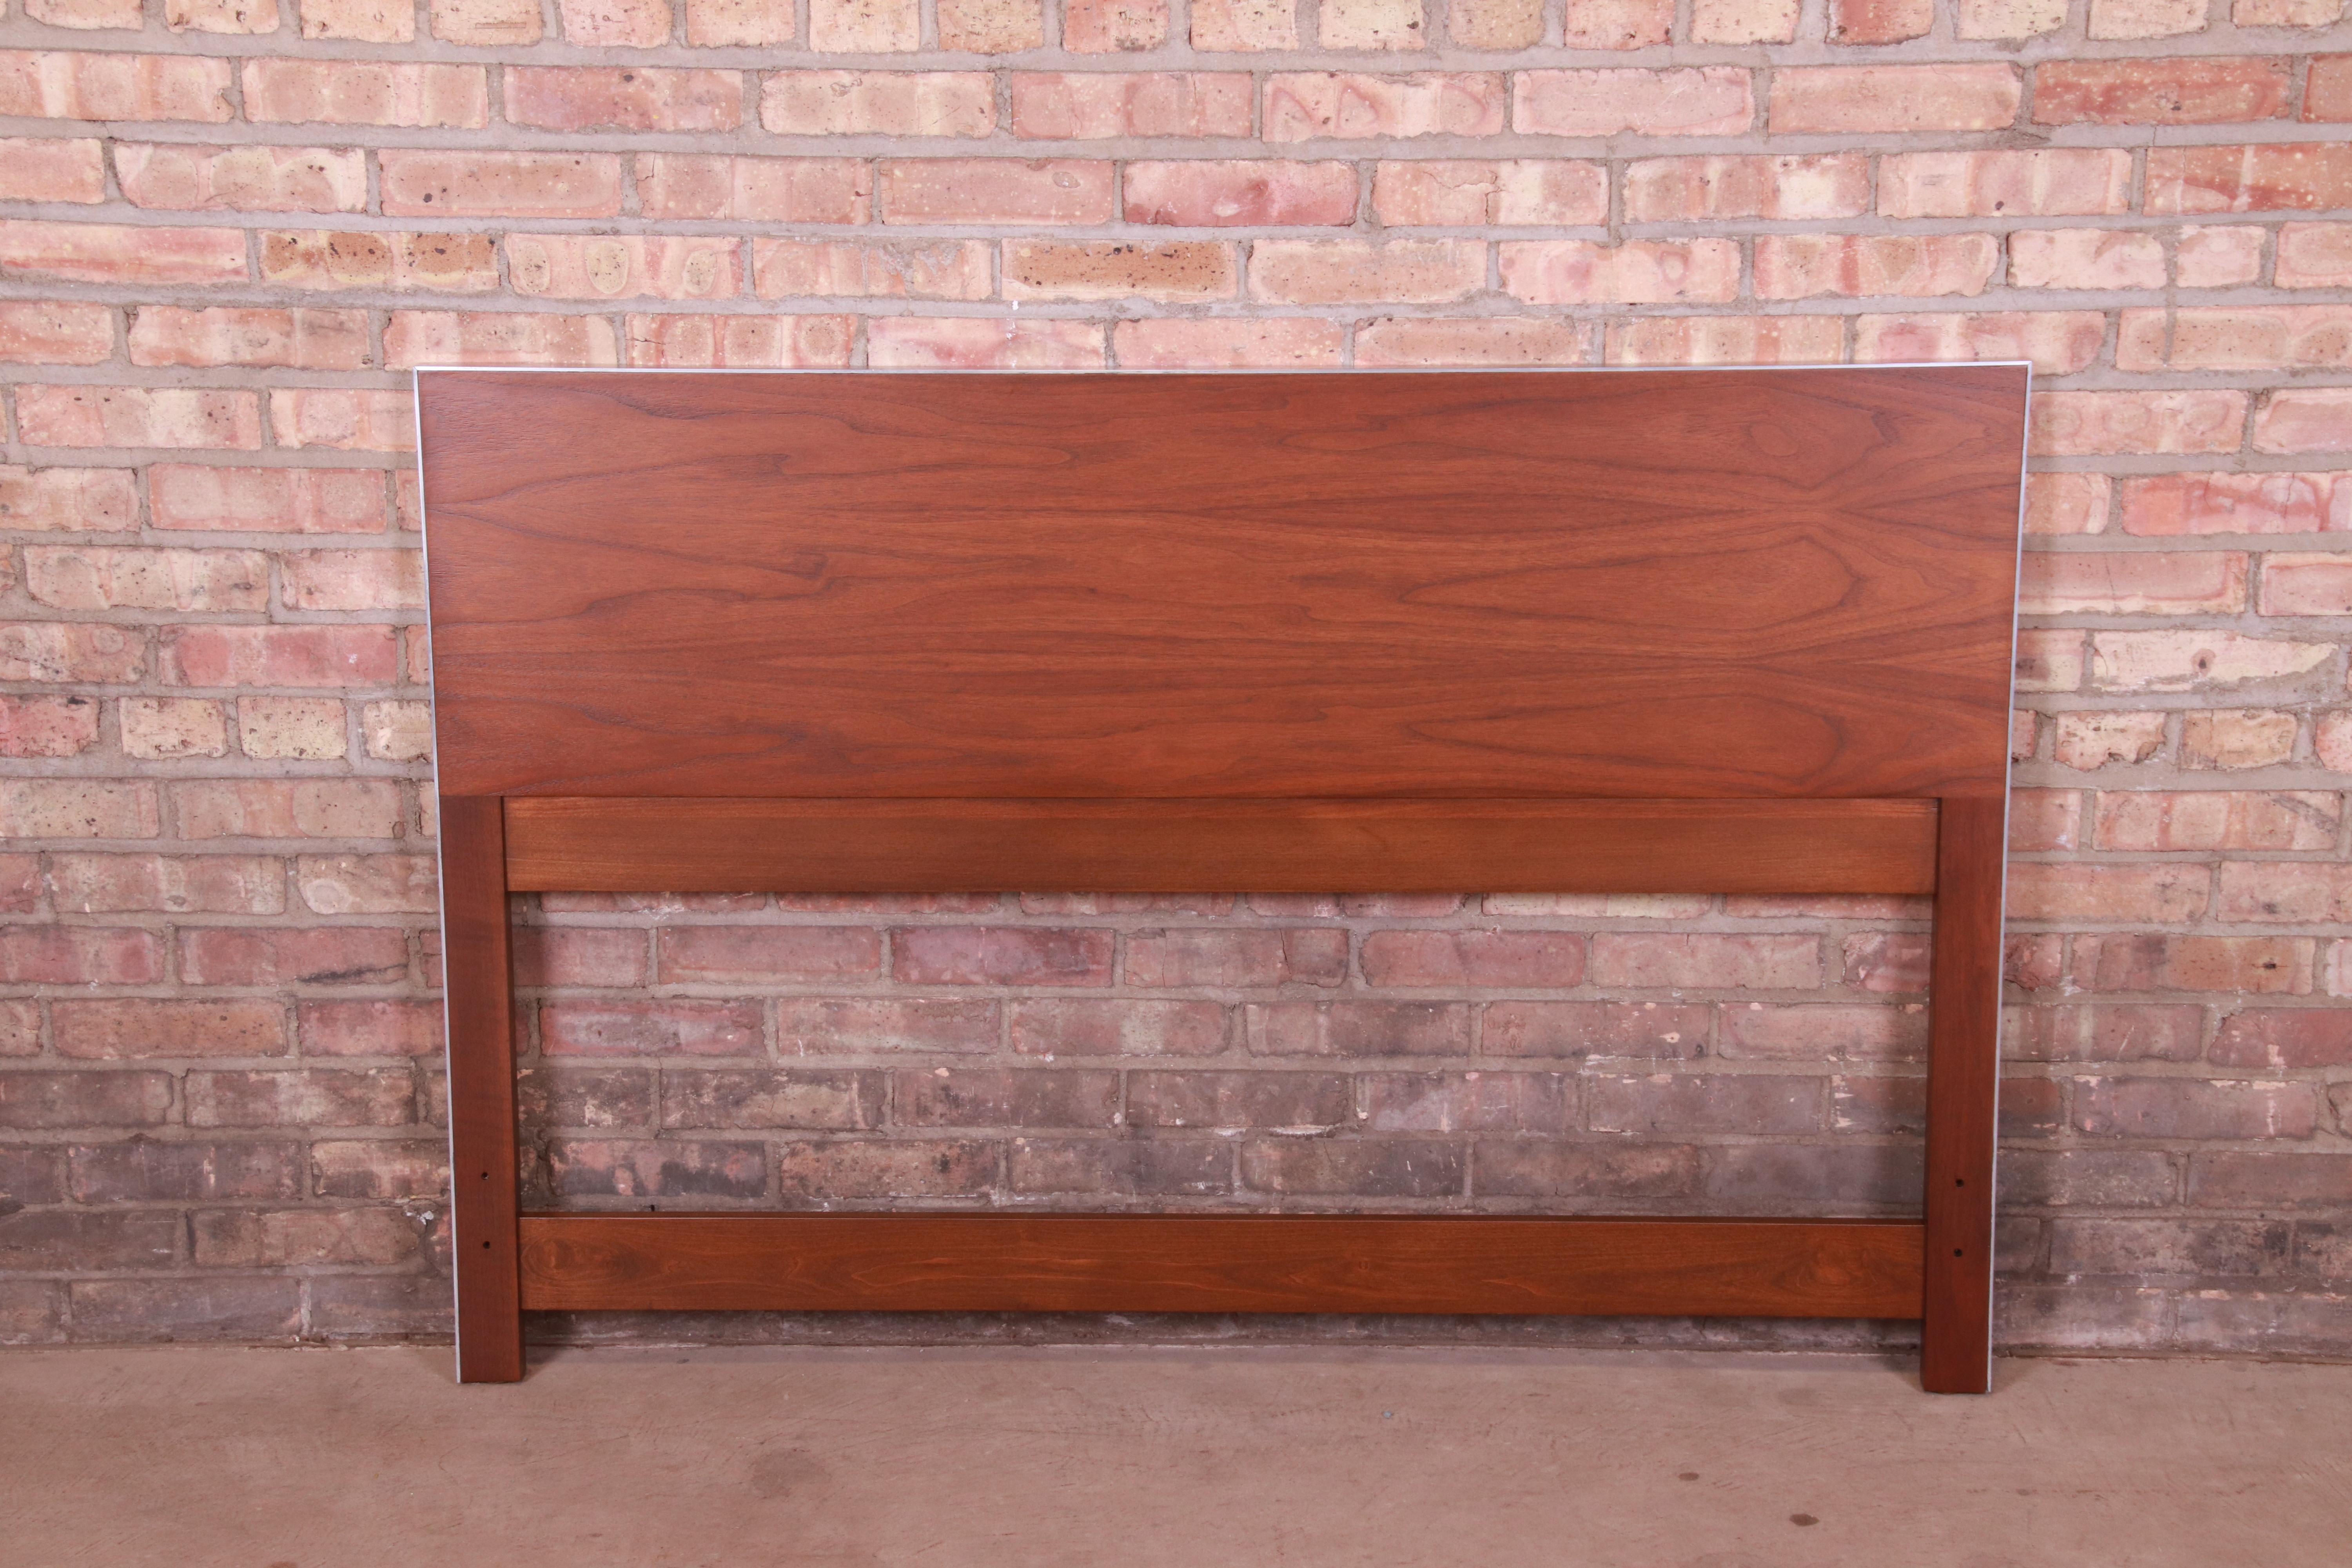 A gorgeous mid-century modern full size headboard

Designed by Paul McCobb for Calvin Furniture, 